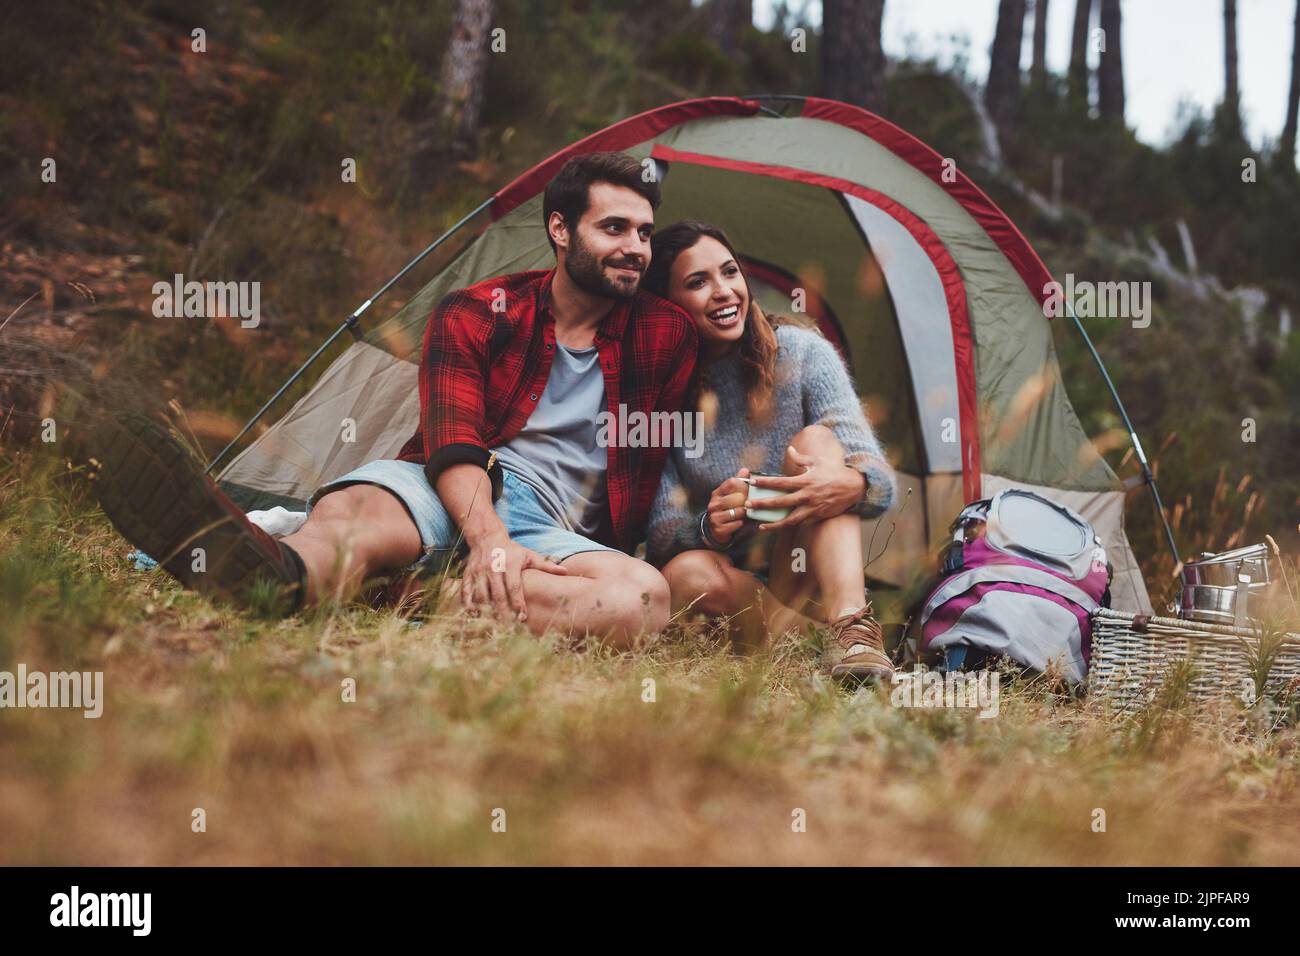 Happy young couple enjoying themselves at a campsite. Romantic young couple sitting outside a camping tent in the forest. Stock Photo